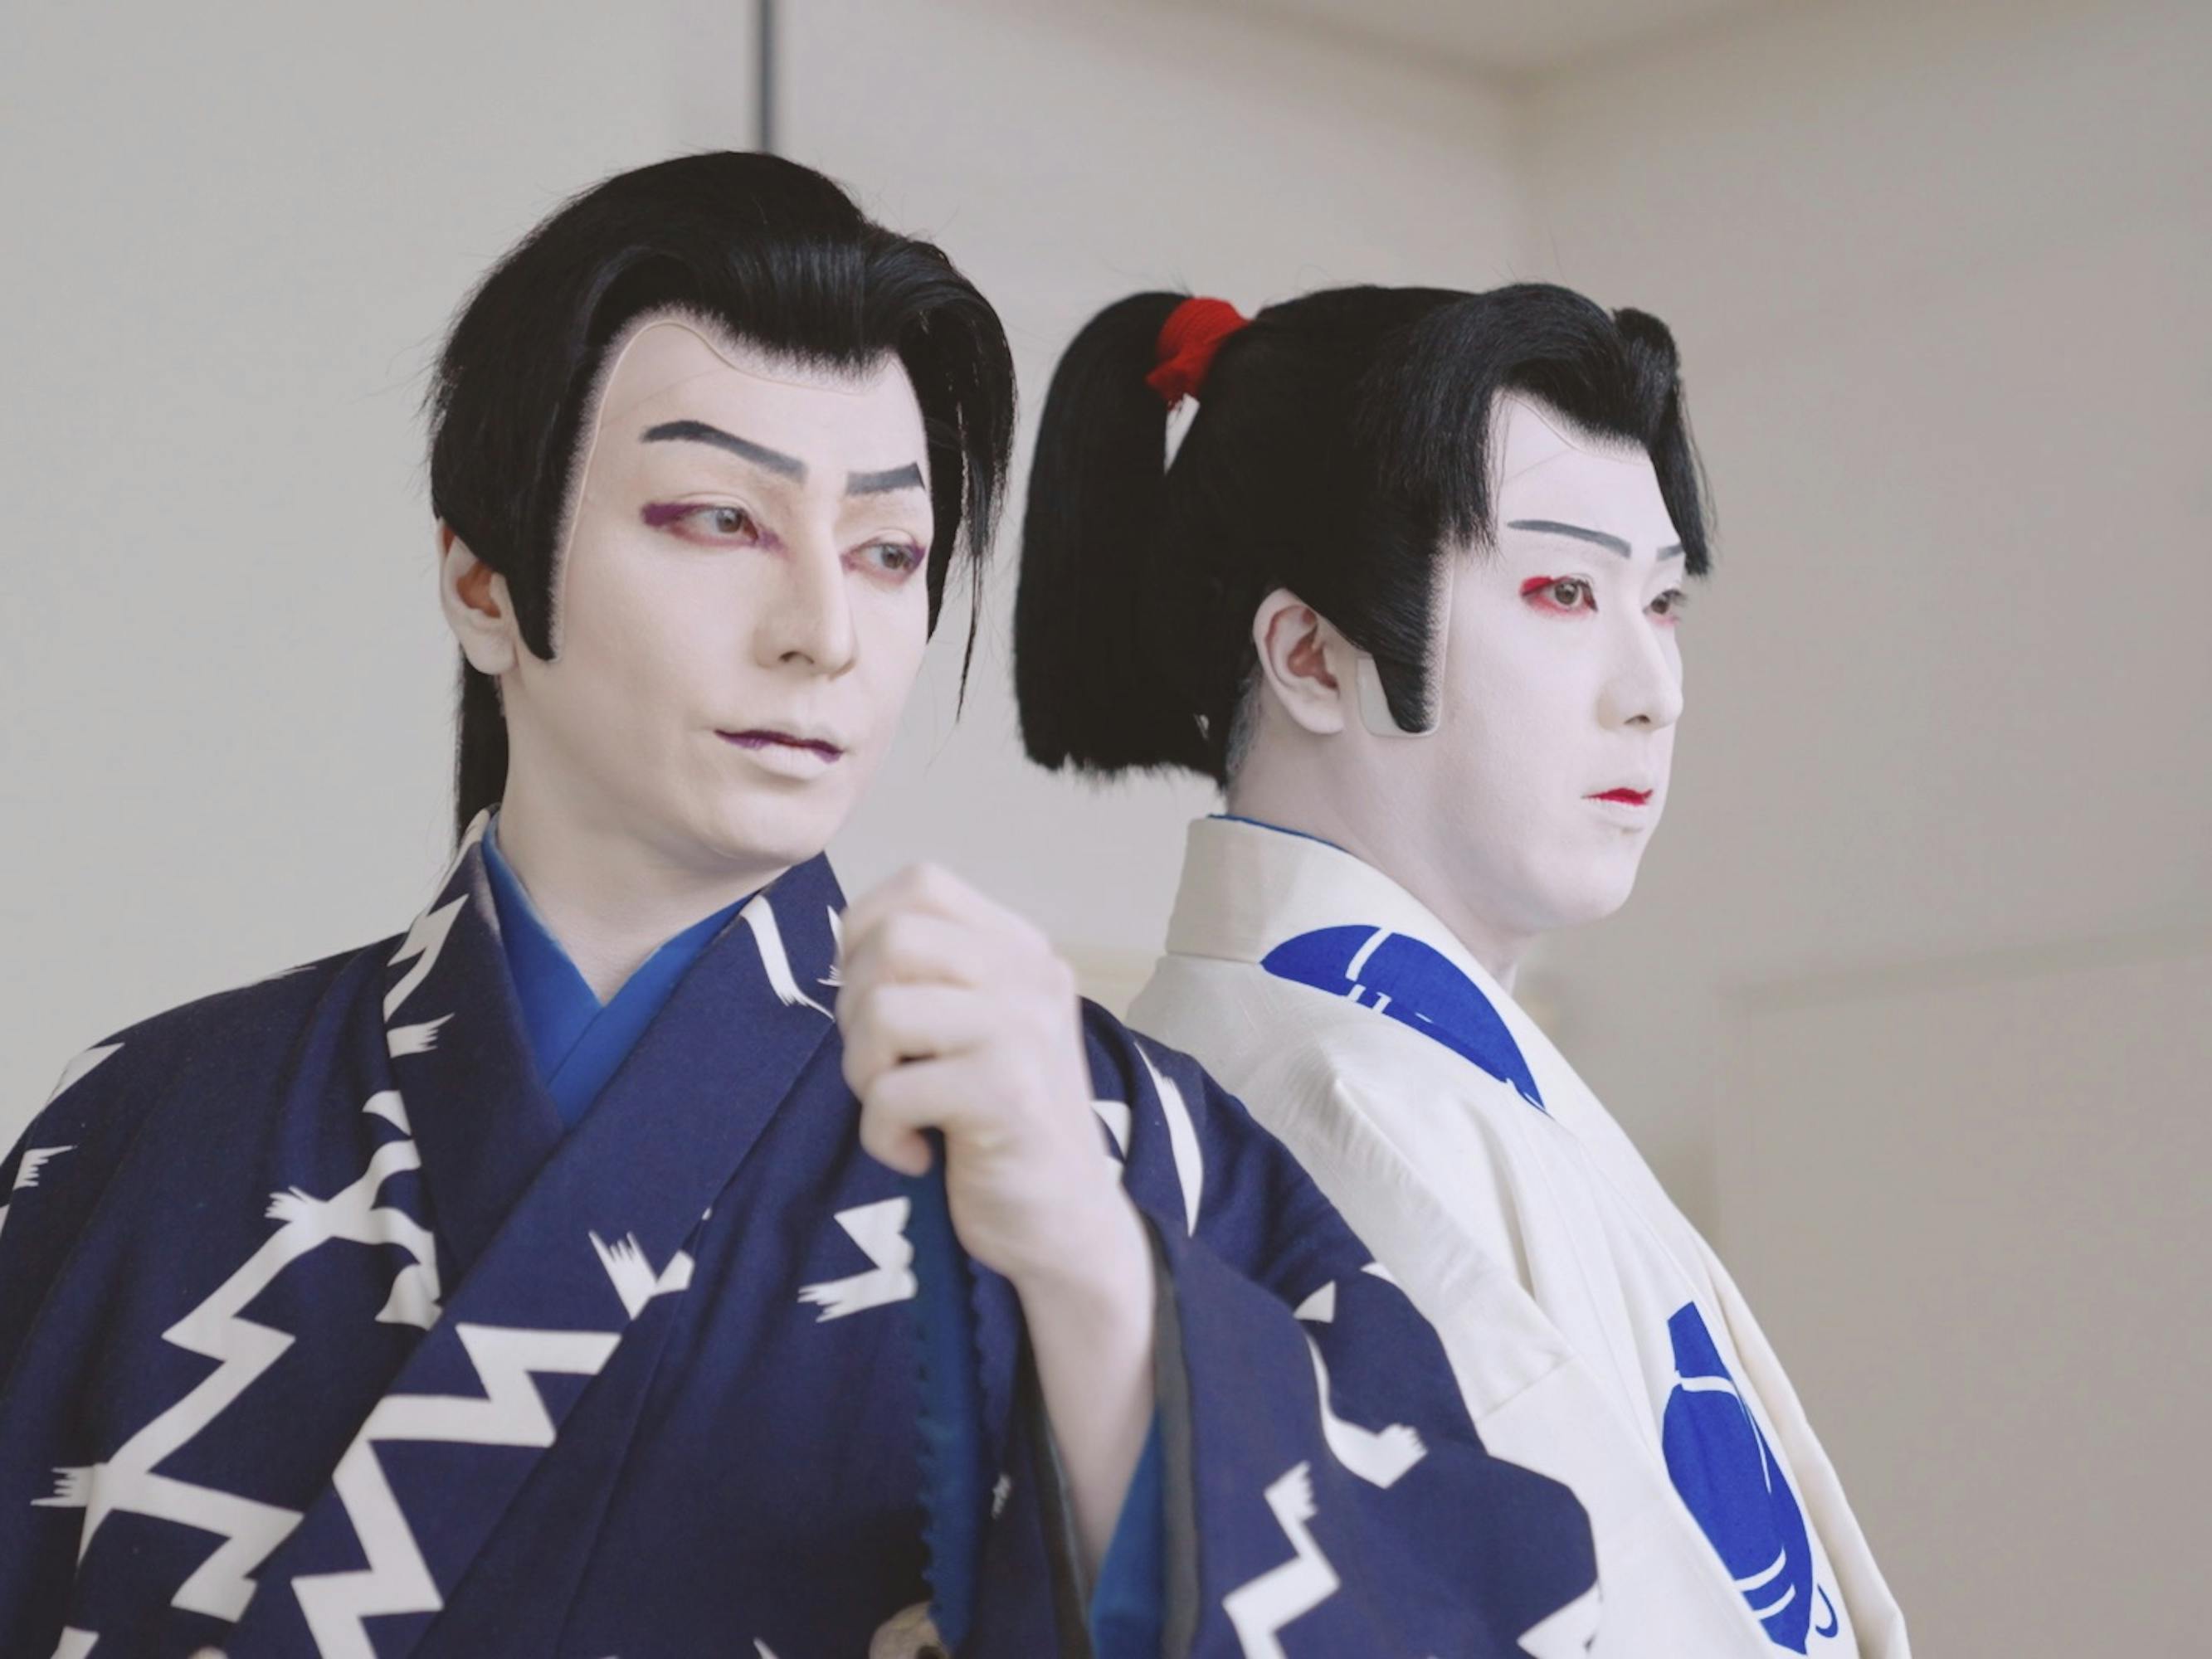 Two kabuki actors wear white and blue robes.